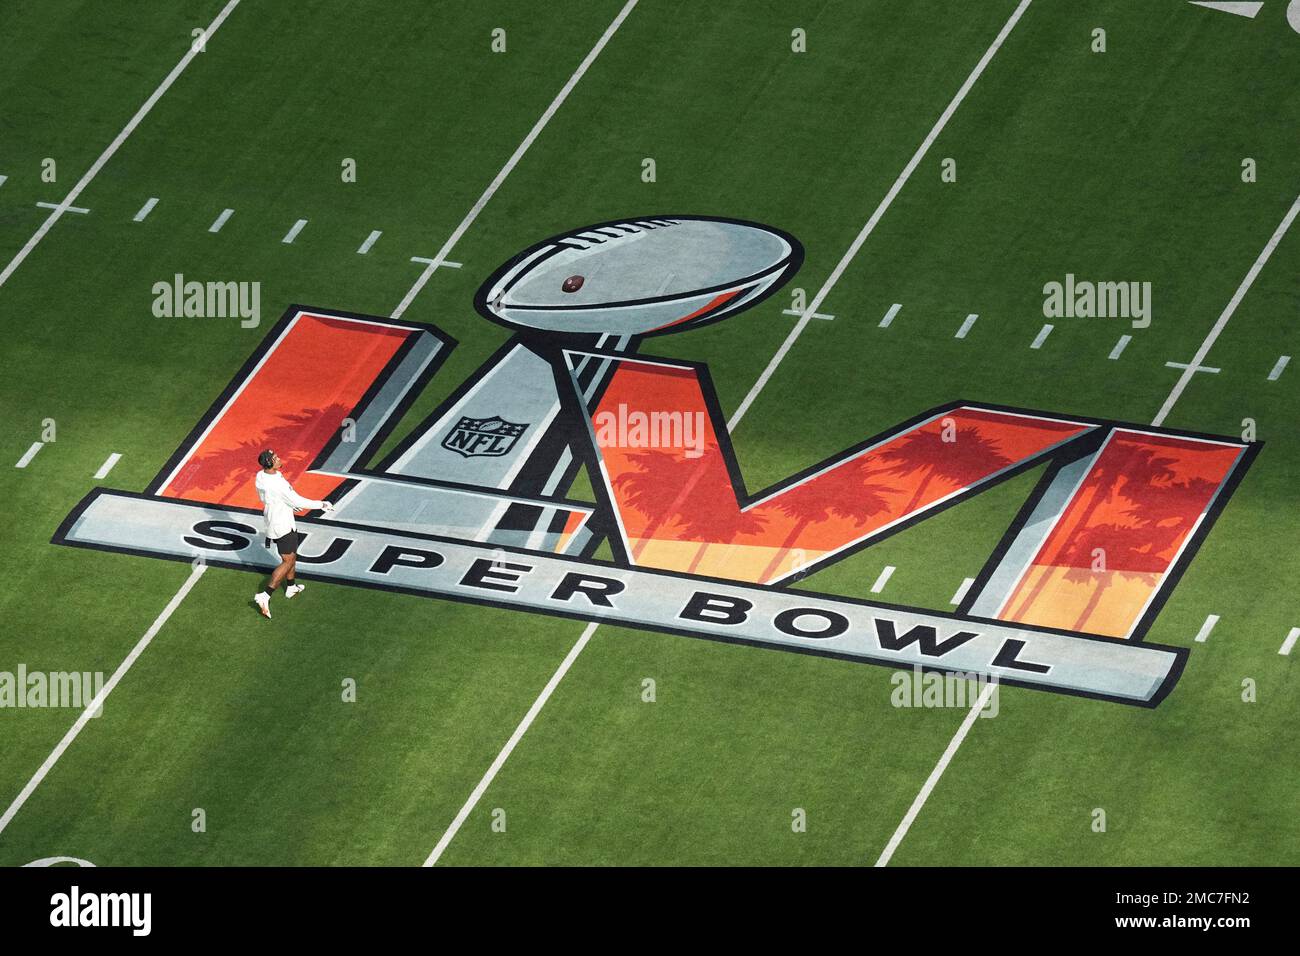 A Cincinnati Bengals player warms up on the field before the NFL Super Bowl  56 football game against the Los Angeles Rams, Sunday, Feb. 13, 2022, in  Inglewood, Calif. (AP Photo/Morry Gash